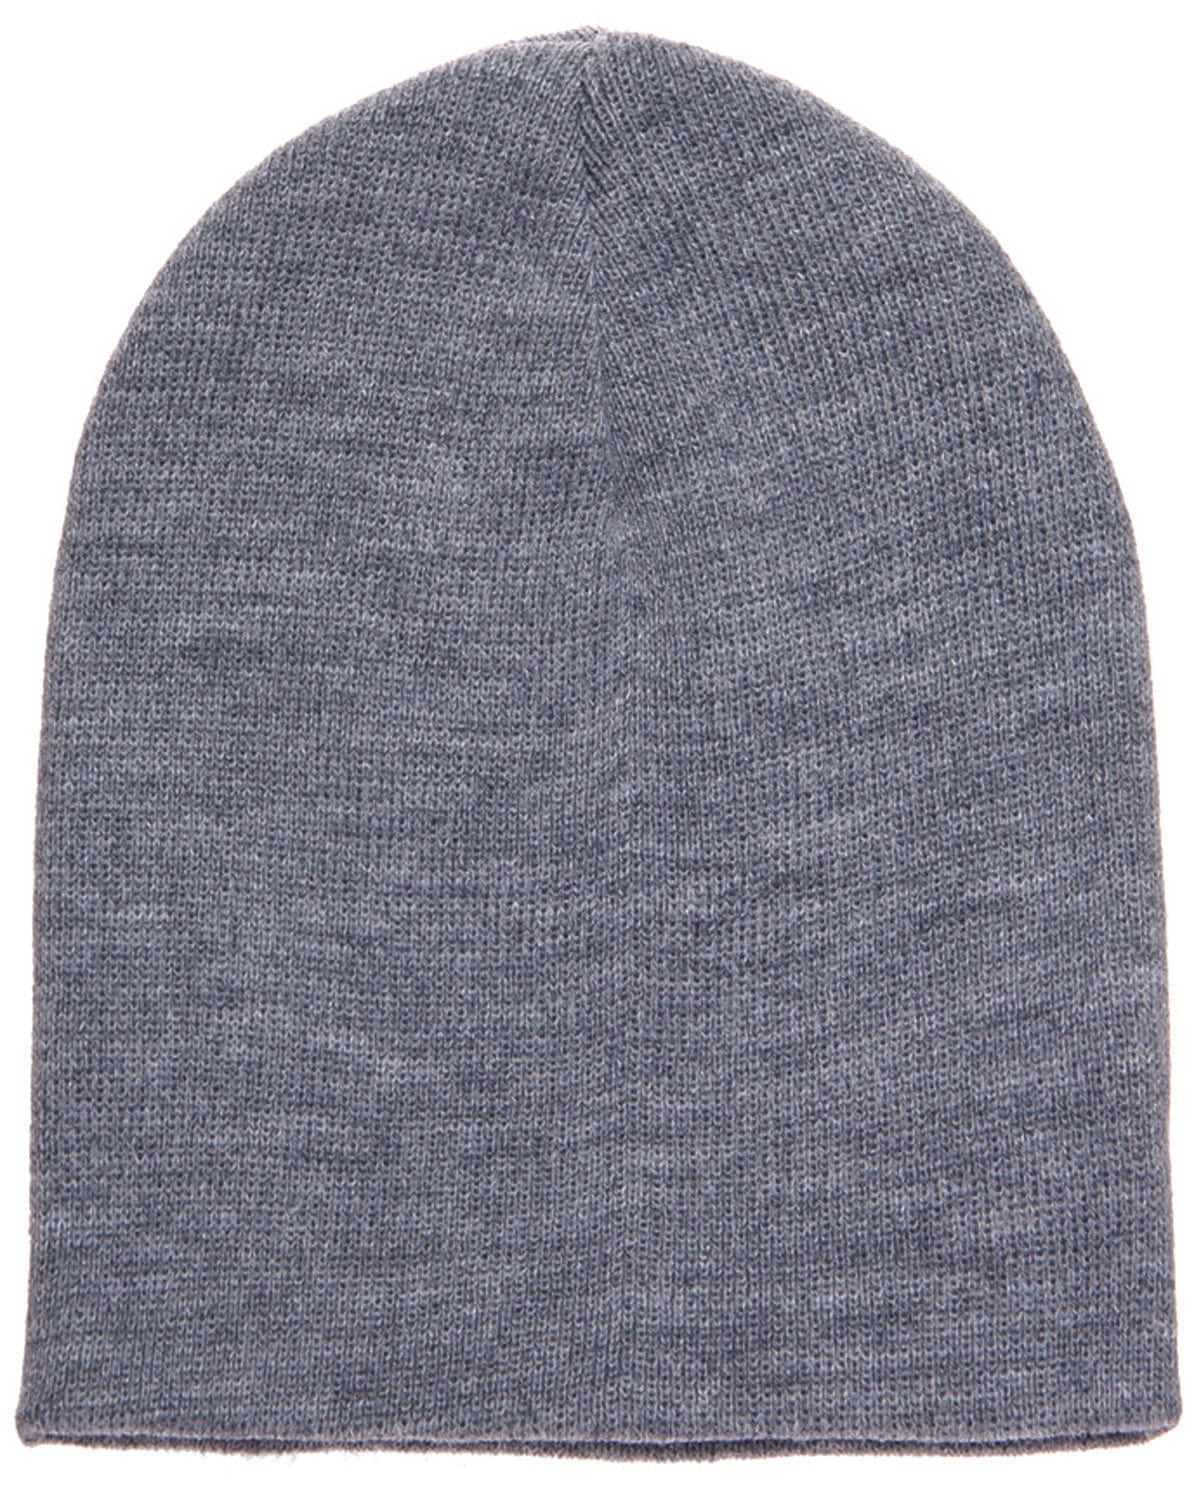 Yupoong 1500: Beanie Knit Adult